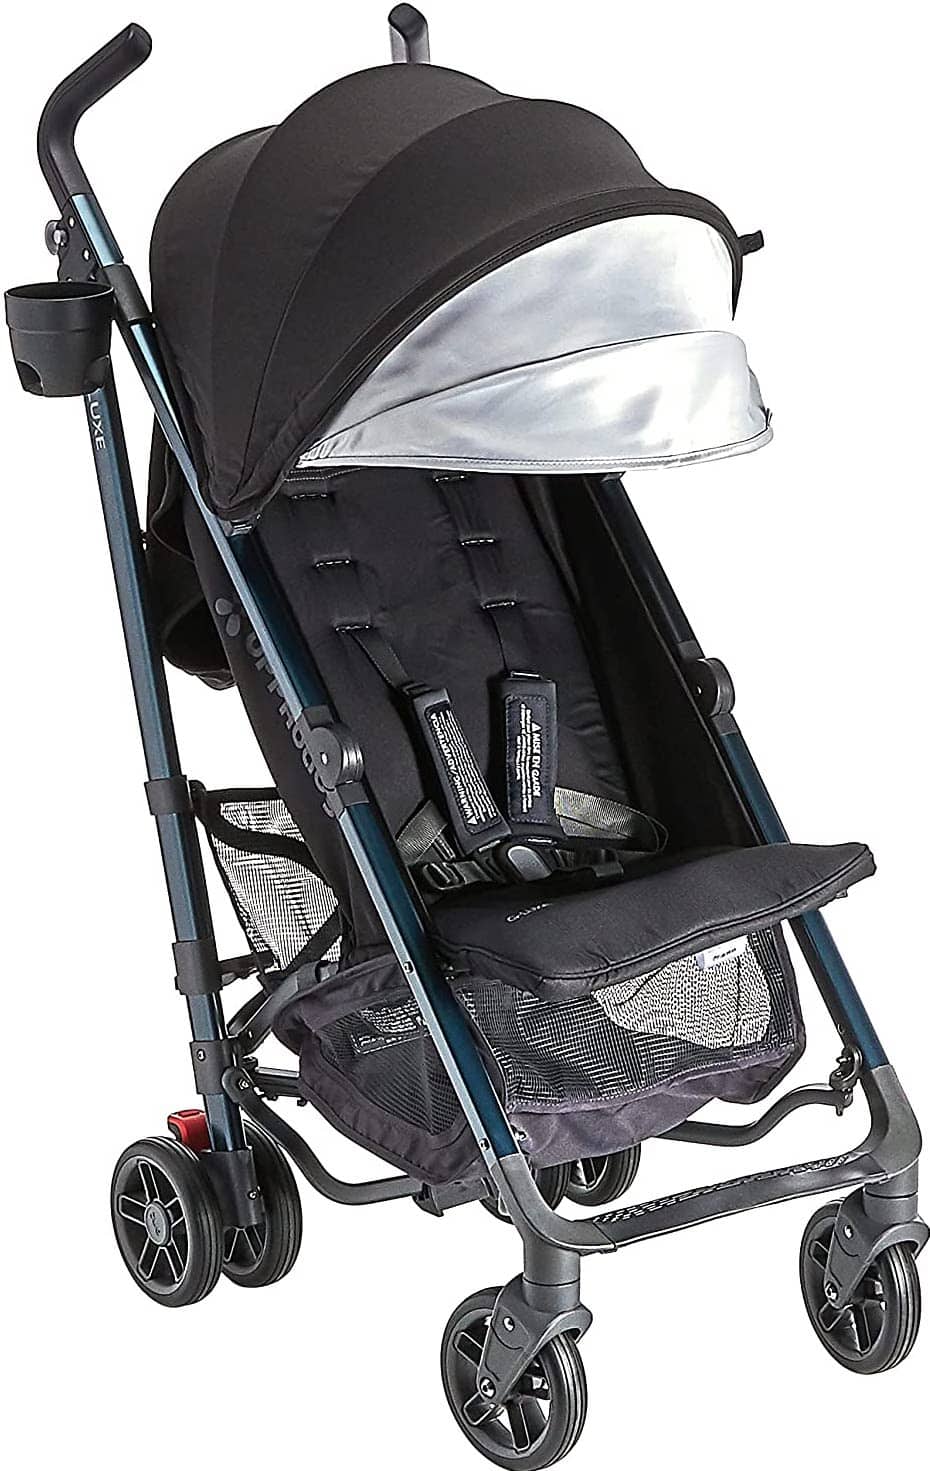 G-Luxe Umbrella stroller in black and silver 